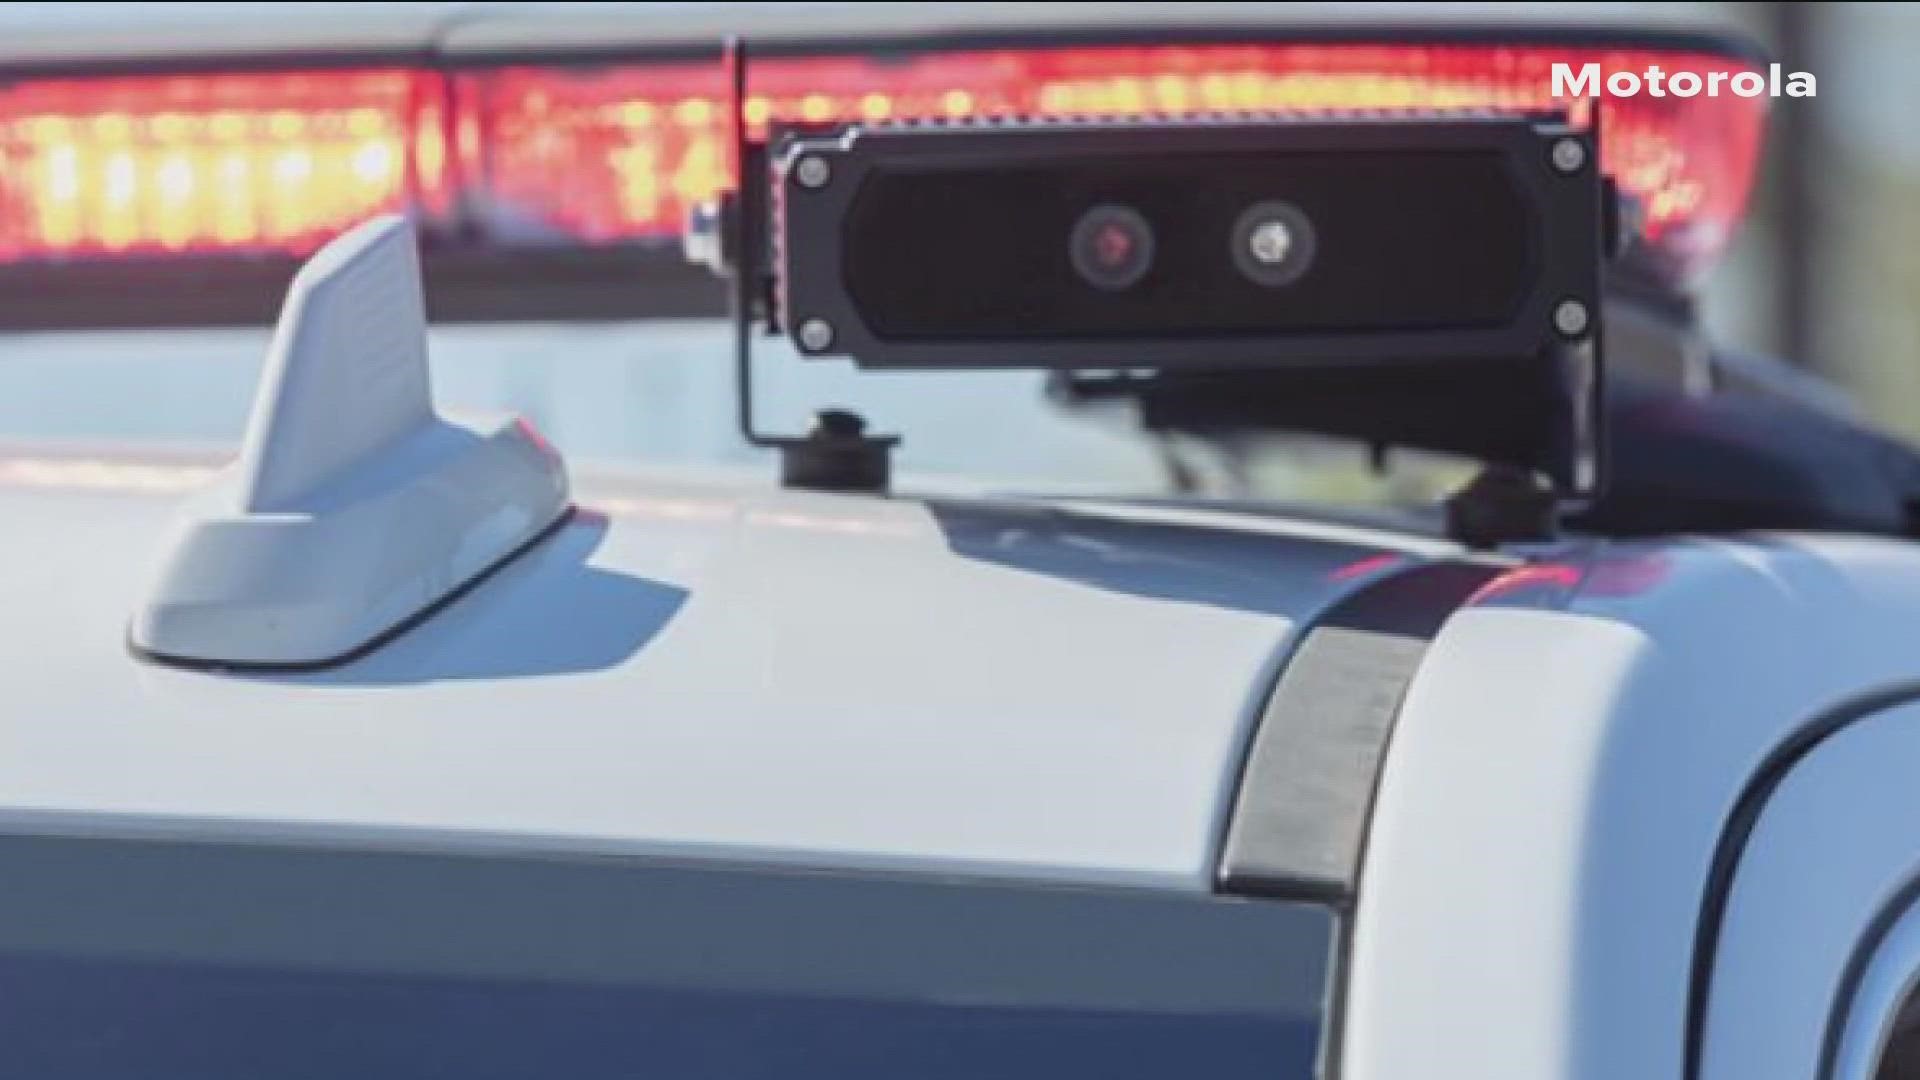 A controversial police system could be making a return to the city. APD is pushing to get license plate camera readers back on patrol vehicles.